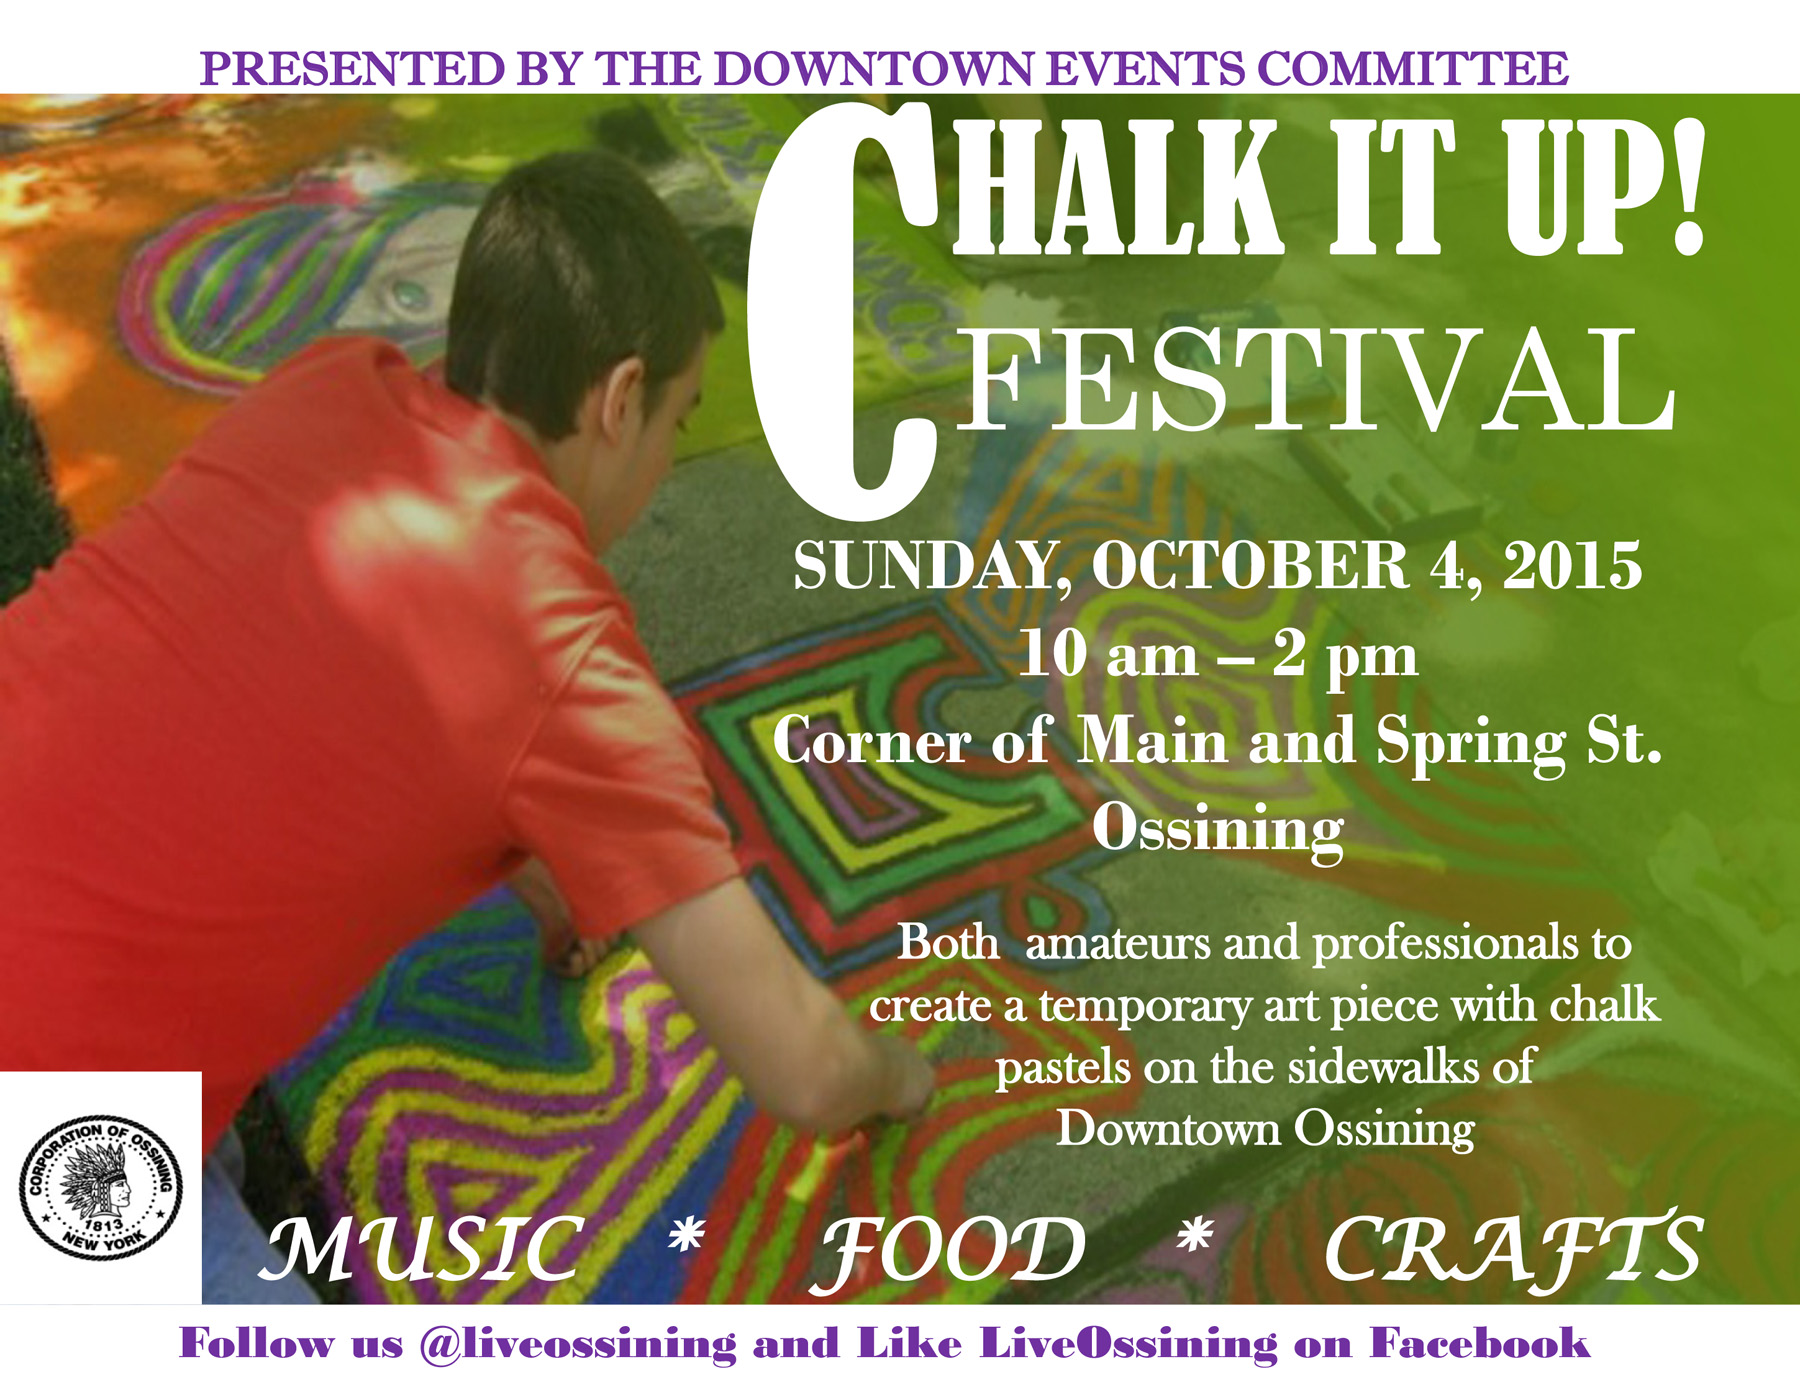 Village of Ossining hosts 2nd annual Chalk It Up! festival on October 4